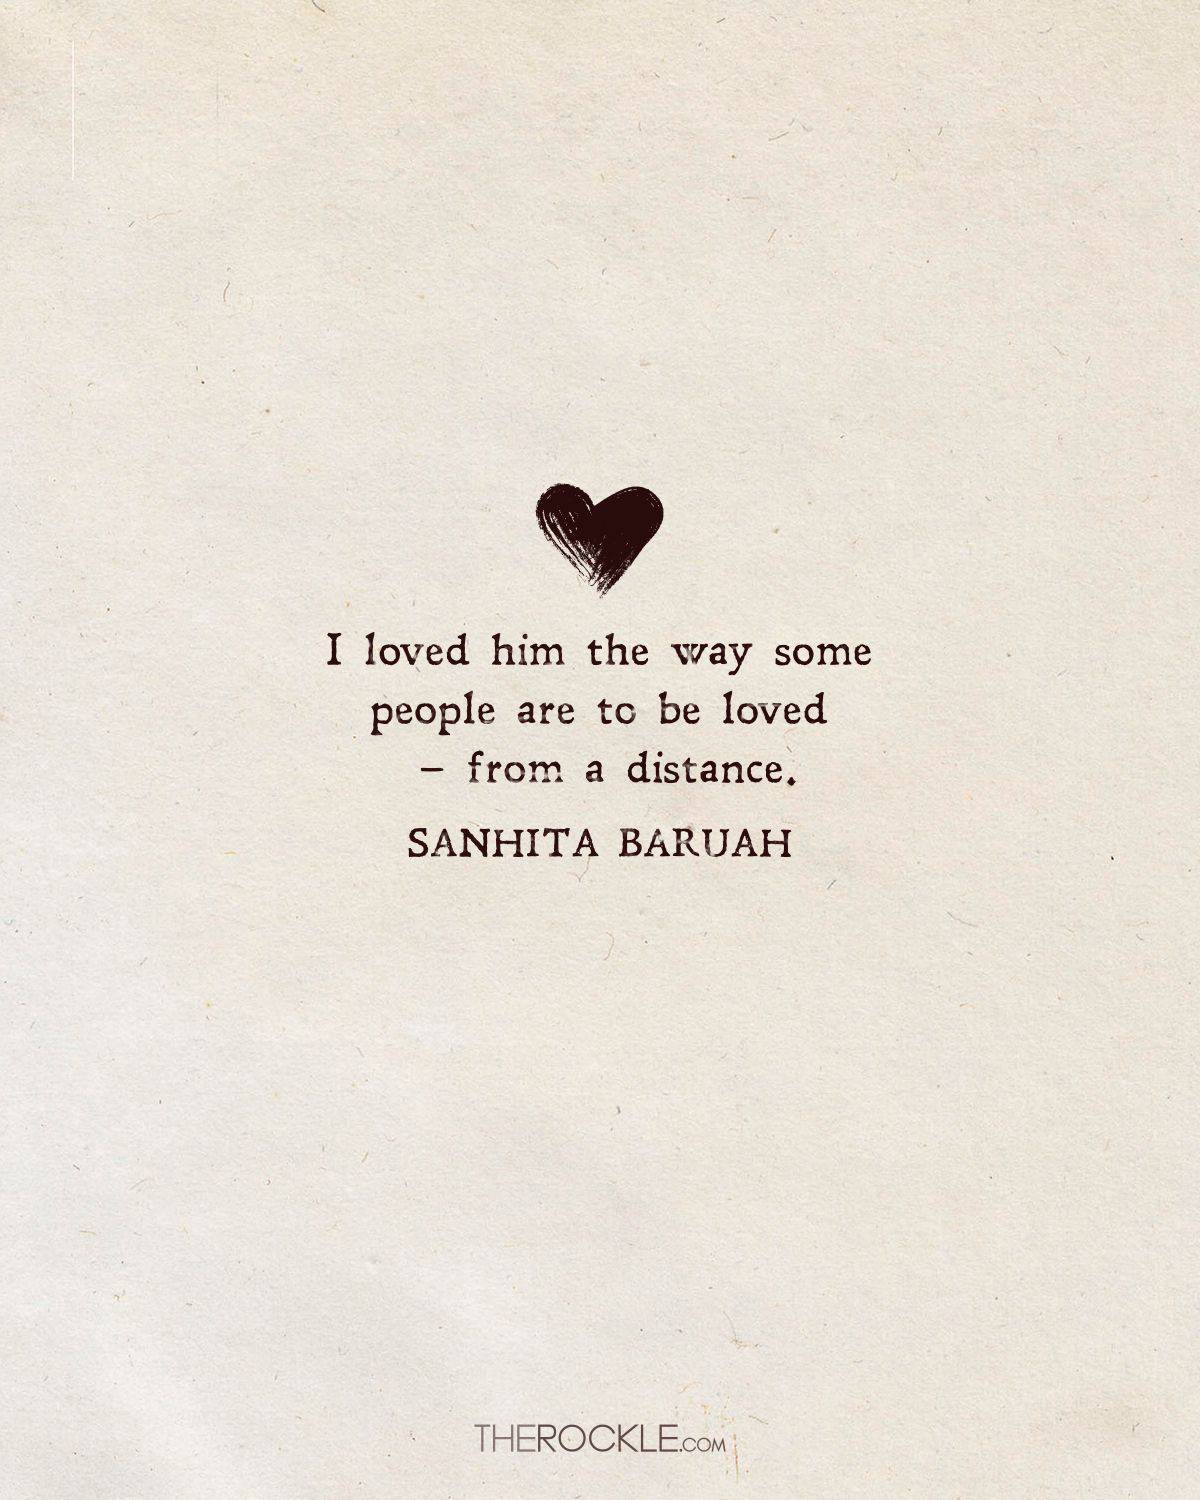 Sad Love Quotes: 50 Ways Love Hurts - The Rockle